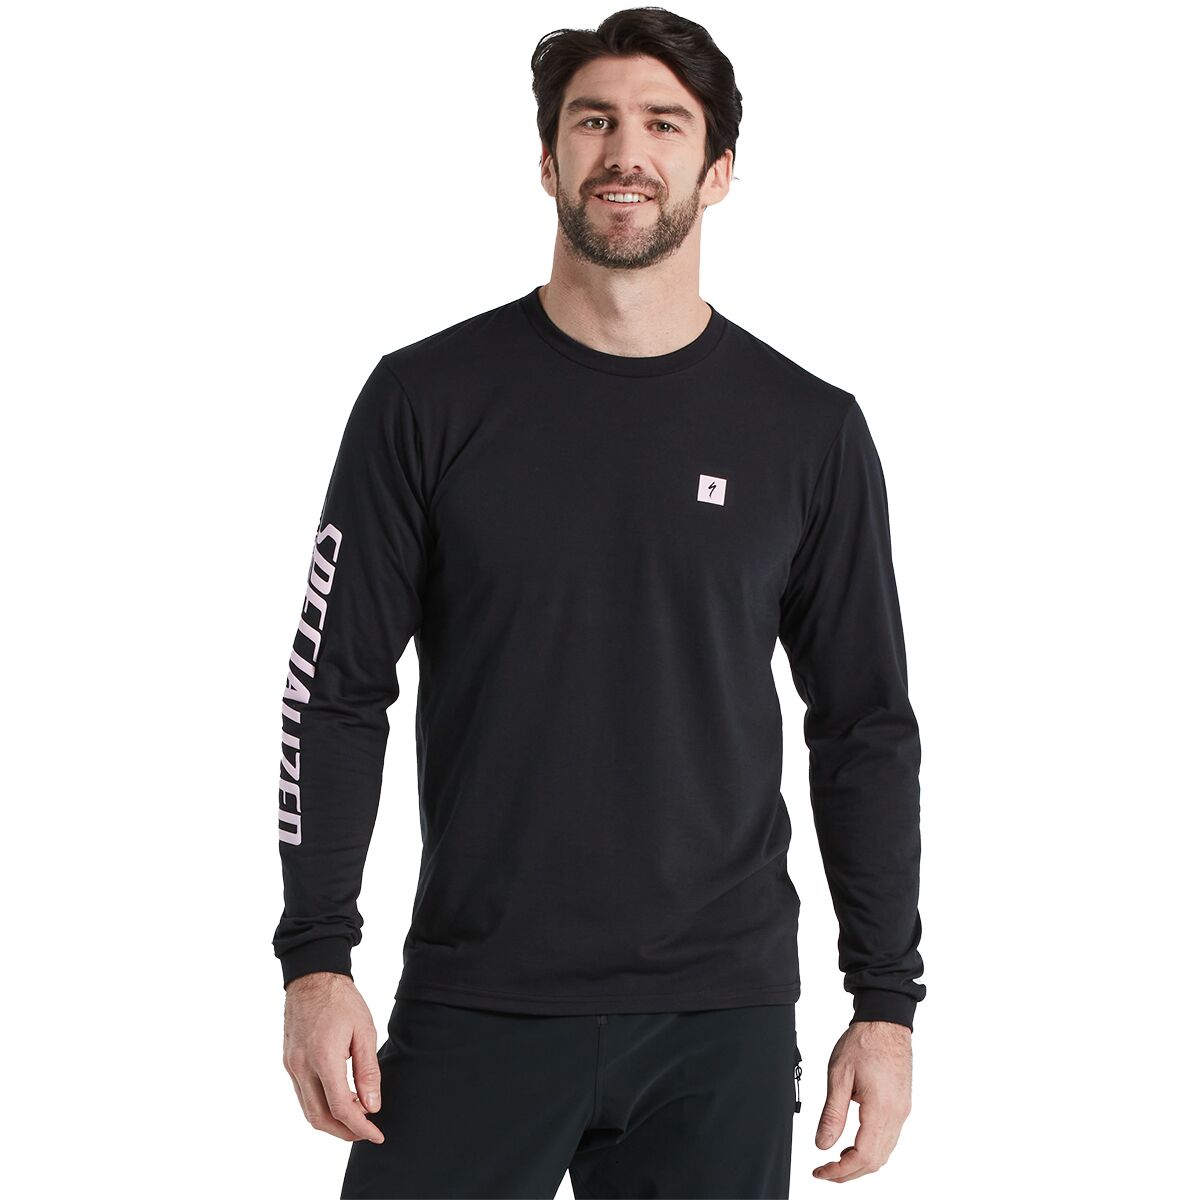 Specialized Altered Long-Sleeve T-Shirt - Men's